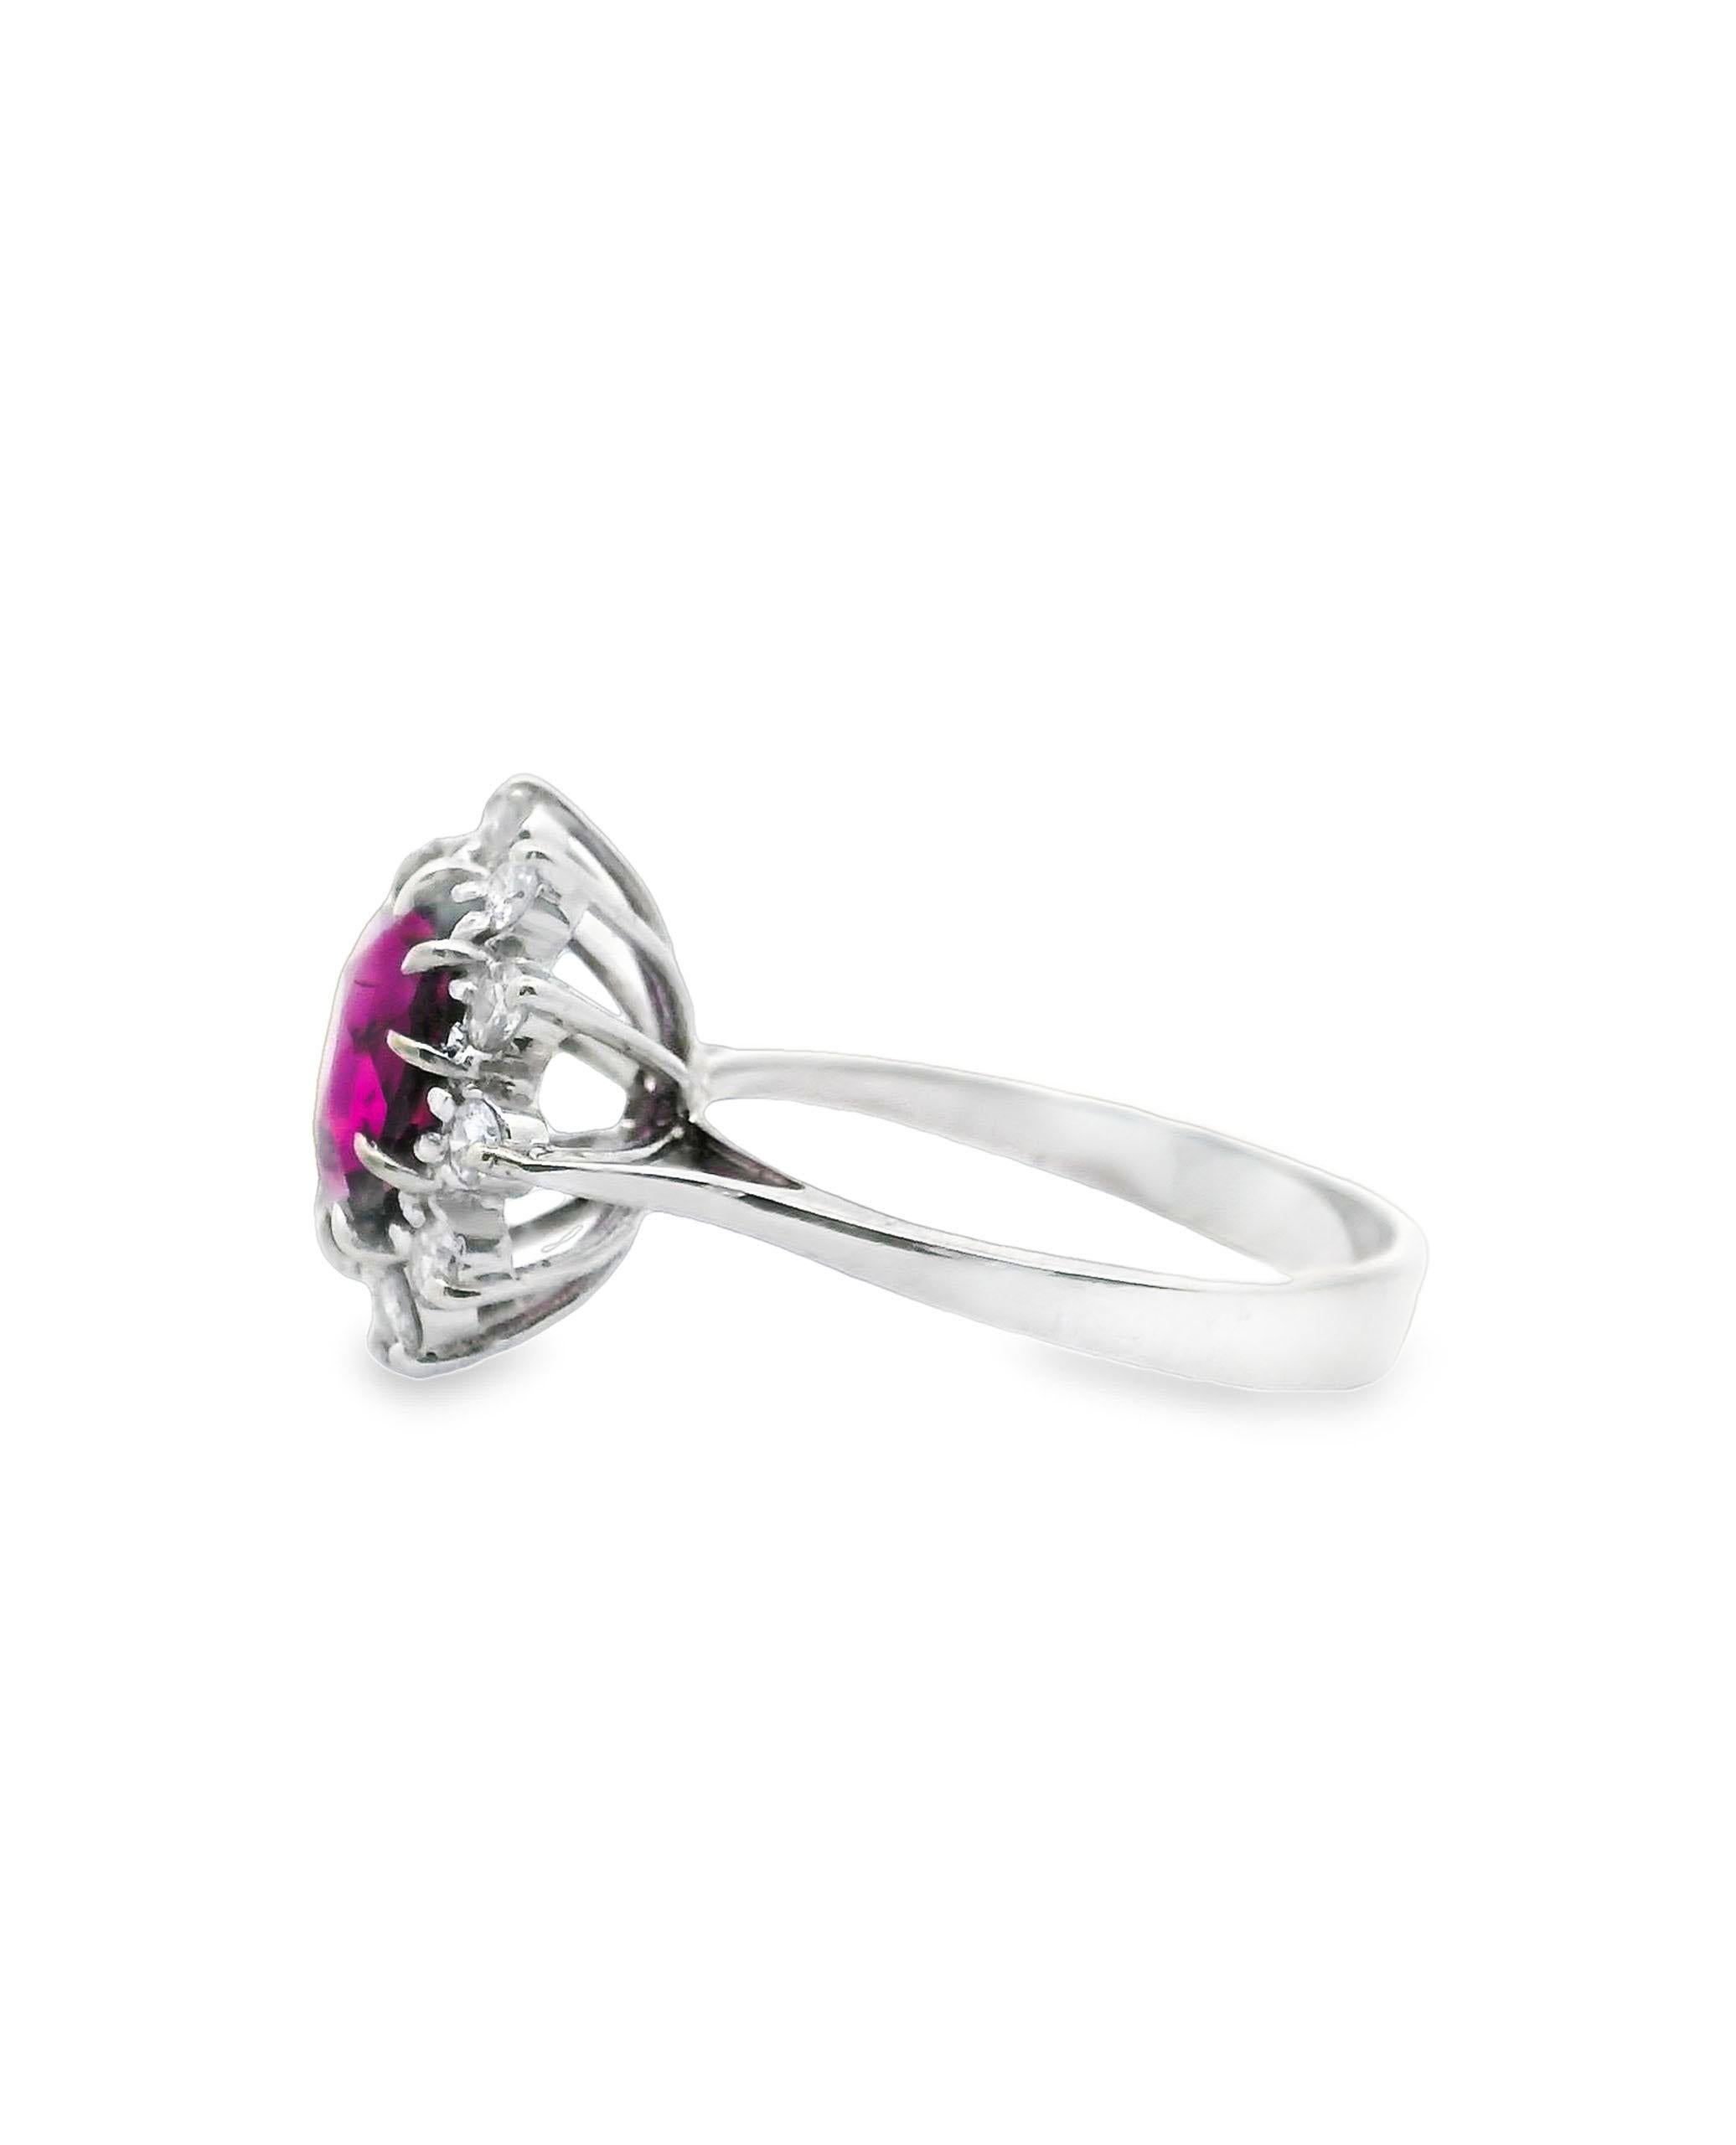 14K white gold ring featuring one center round faceted rhodolite measuring approximately 9mm in diameter. The rhodolite is surrounded by 12 round brilliant-cut diamonds weighing 0.60 carats total weight. 

- Finger size 7
- The diamonds are G color,